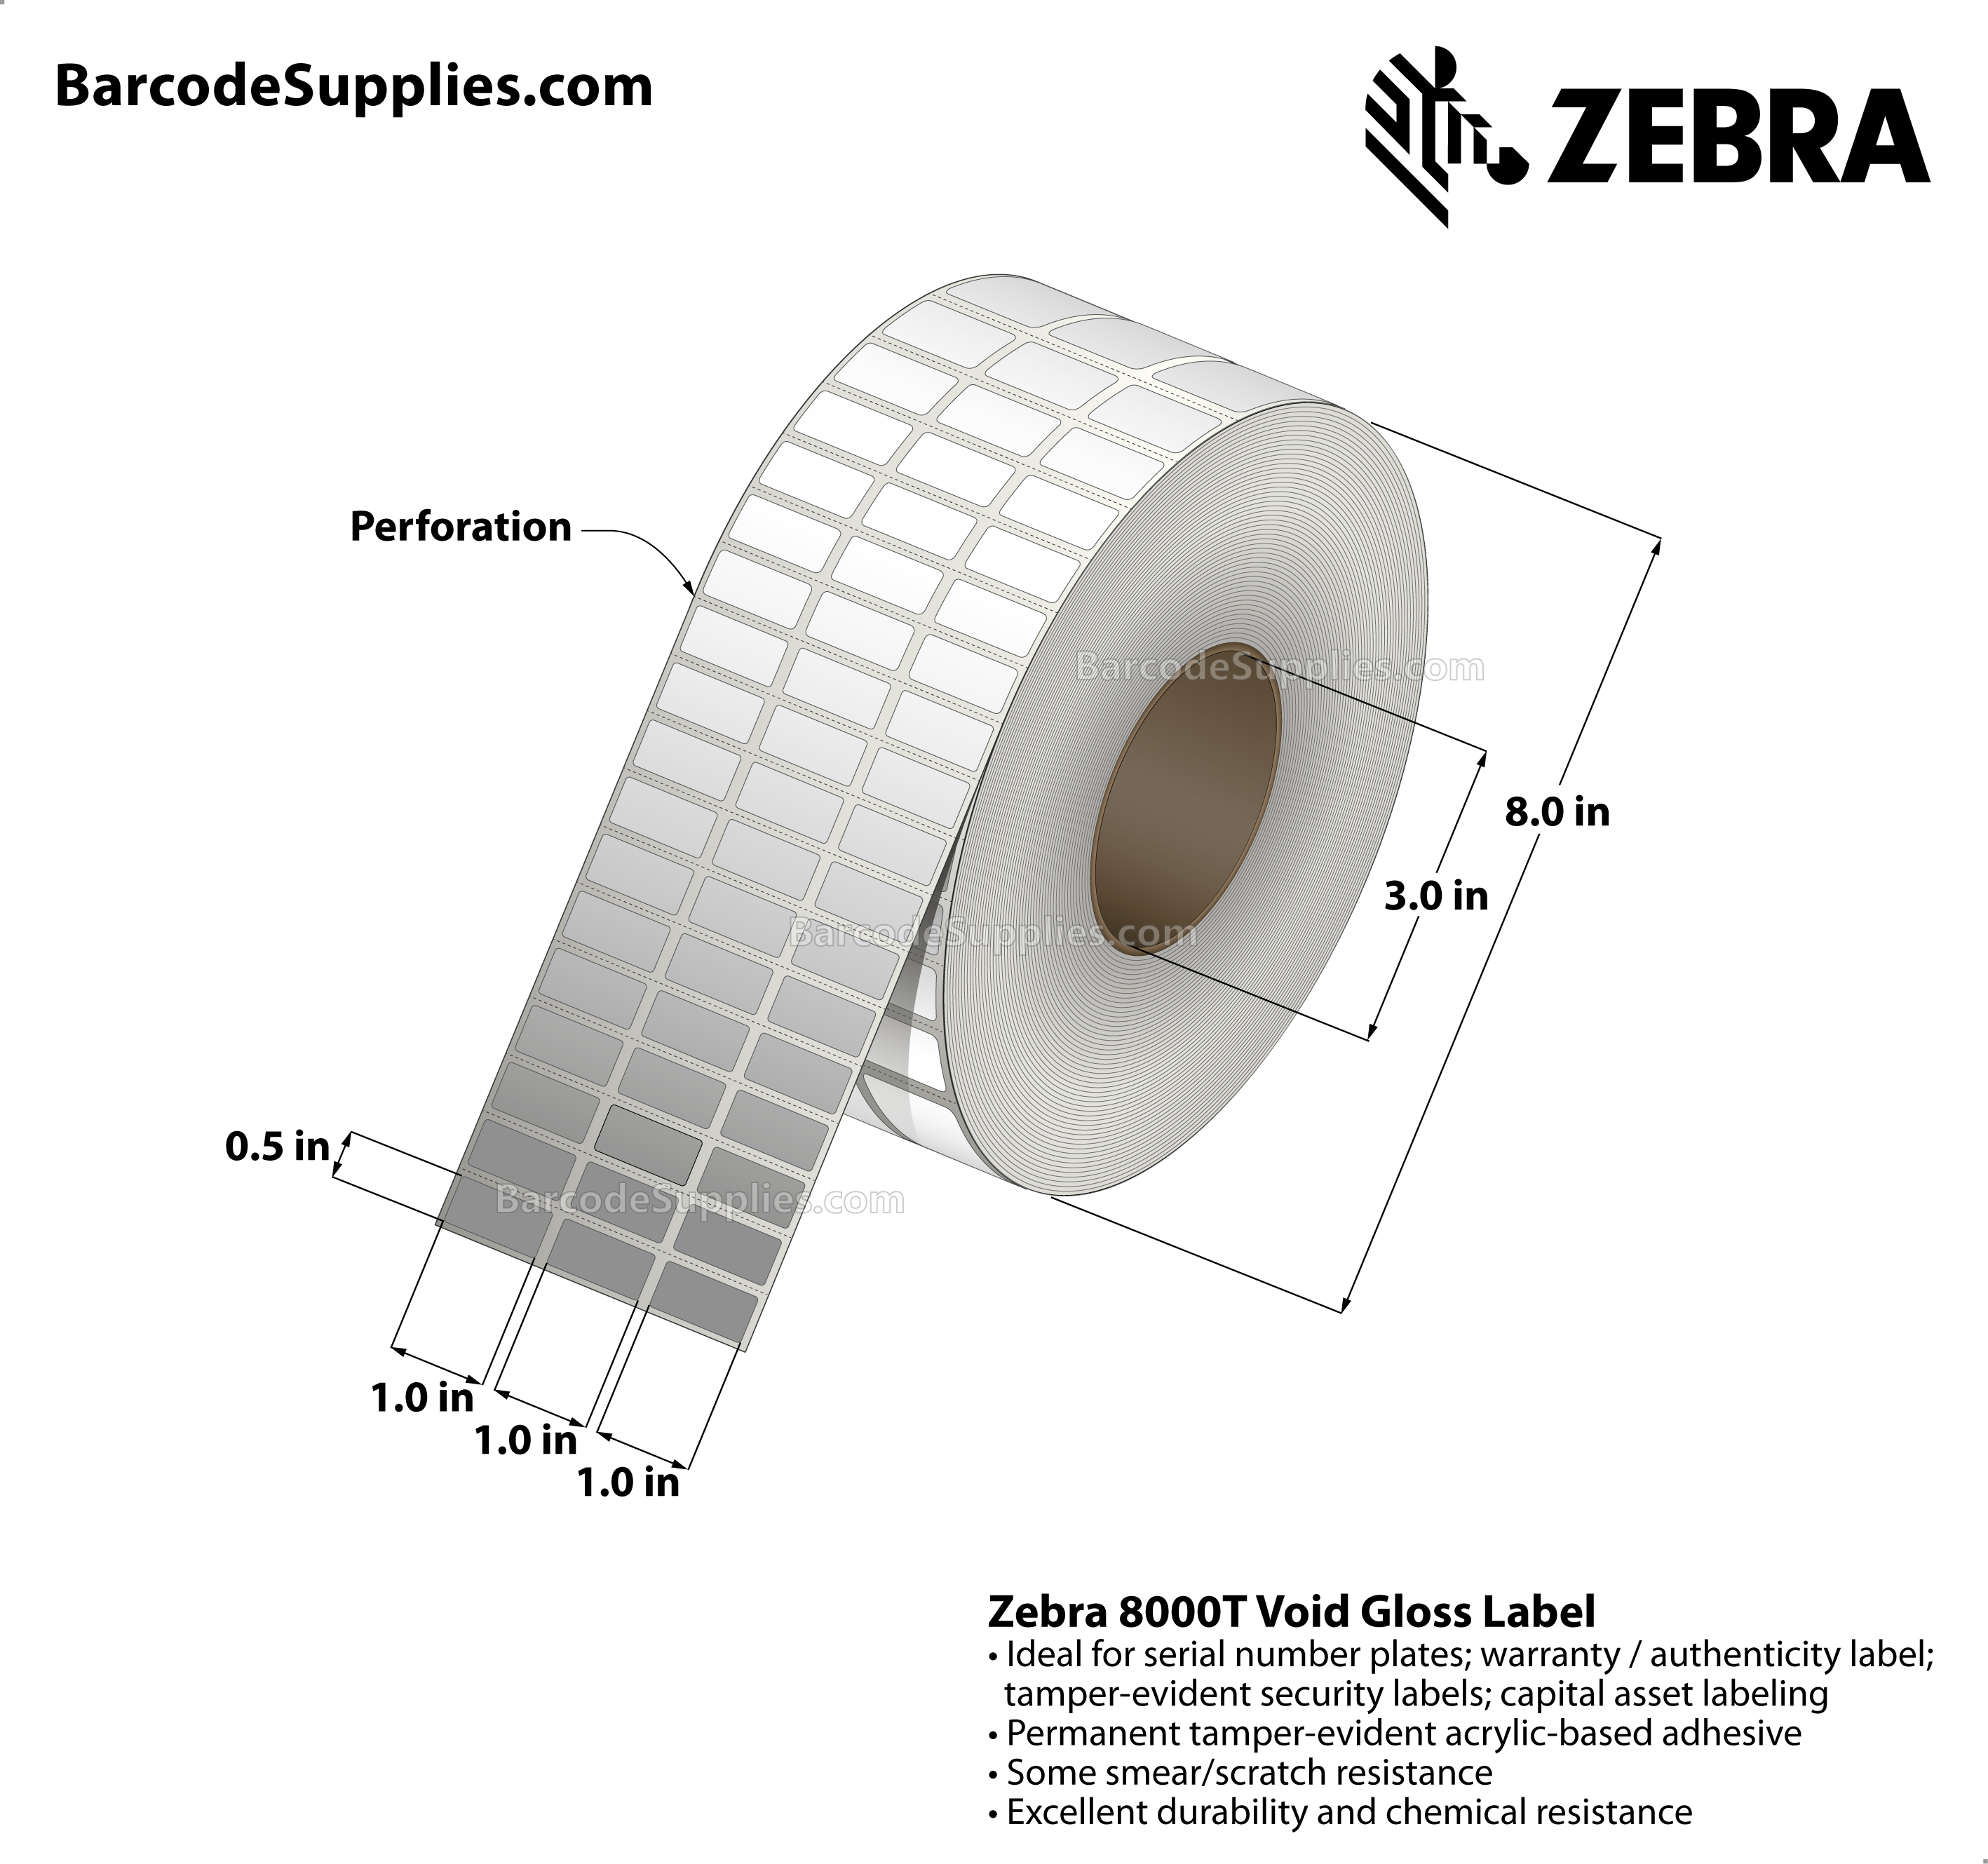 1 x 0.5 Thermal Transfer White 8000T Void Gloss (3-Across) Labels With Tamper-evident Adhesive - Perforated - 10002 Labels Per Roll - Carton Of 1 Rolls - 10002 Labels Total - MPN: 10023255